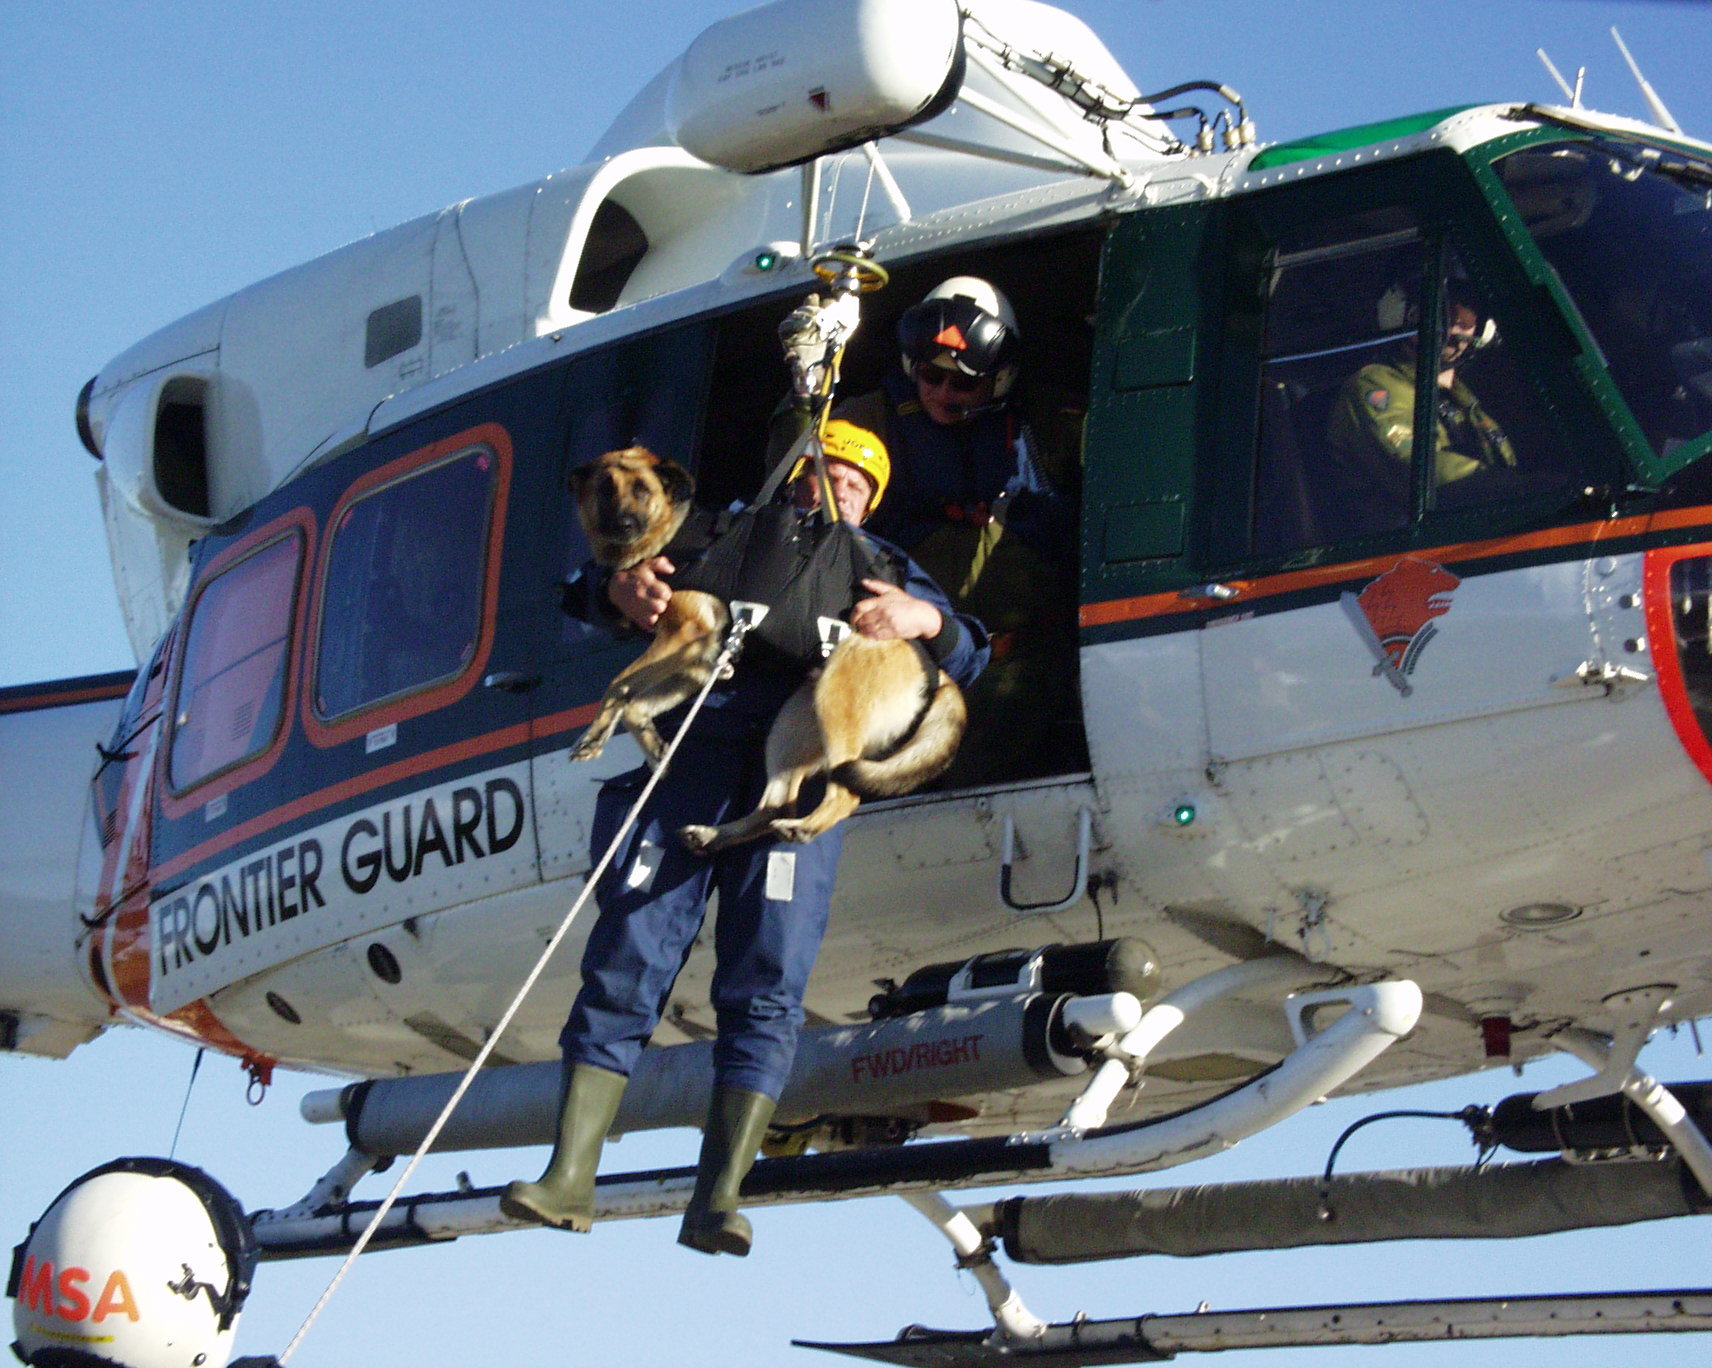 A winch is being used to lower a border guard dog out of a helicopter by its harness. The dog is also attached to its trainer by the harness.